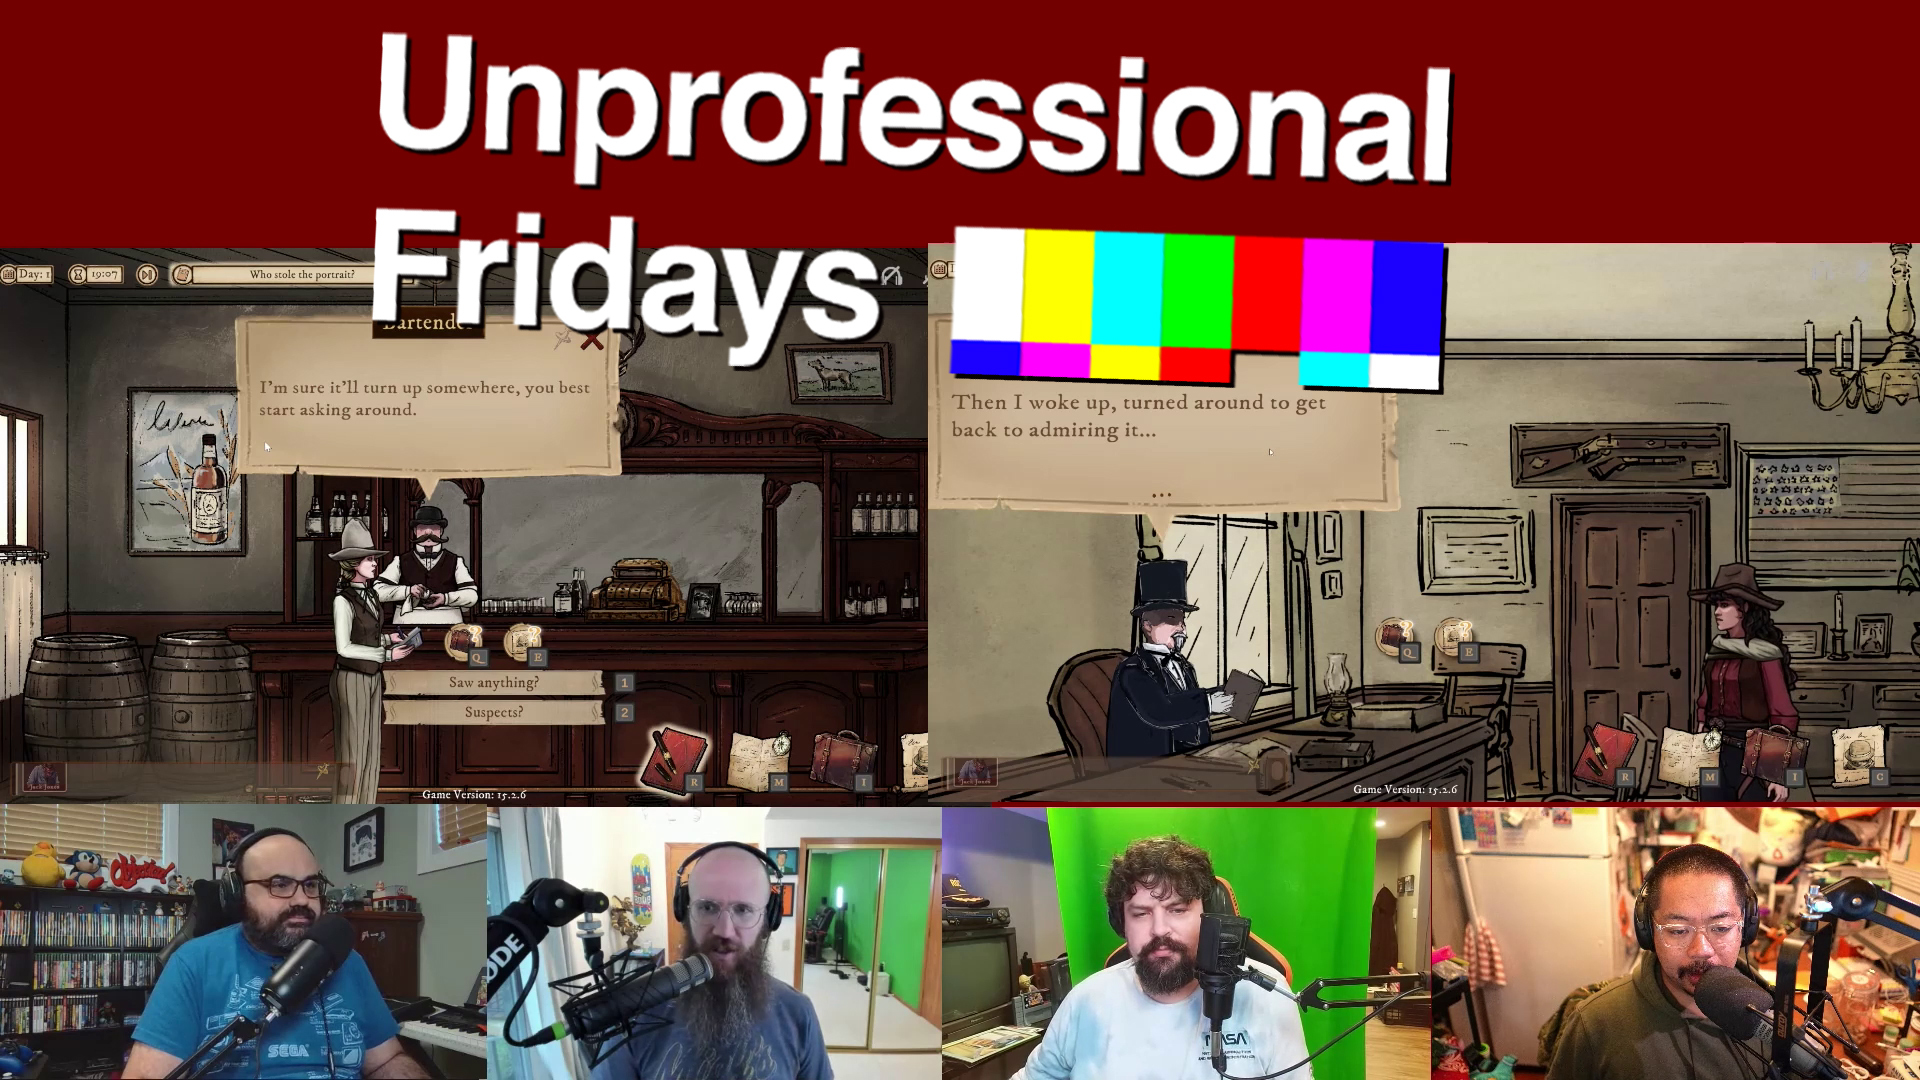 Unprofessional Fridays in the West